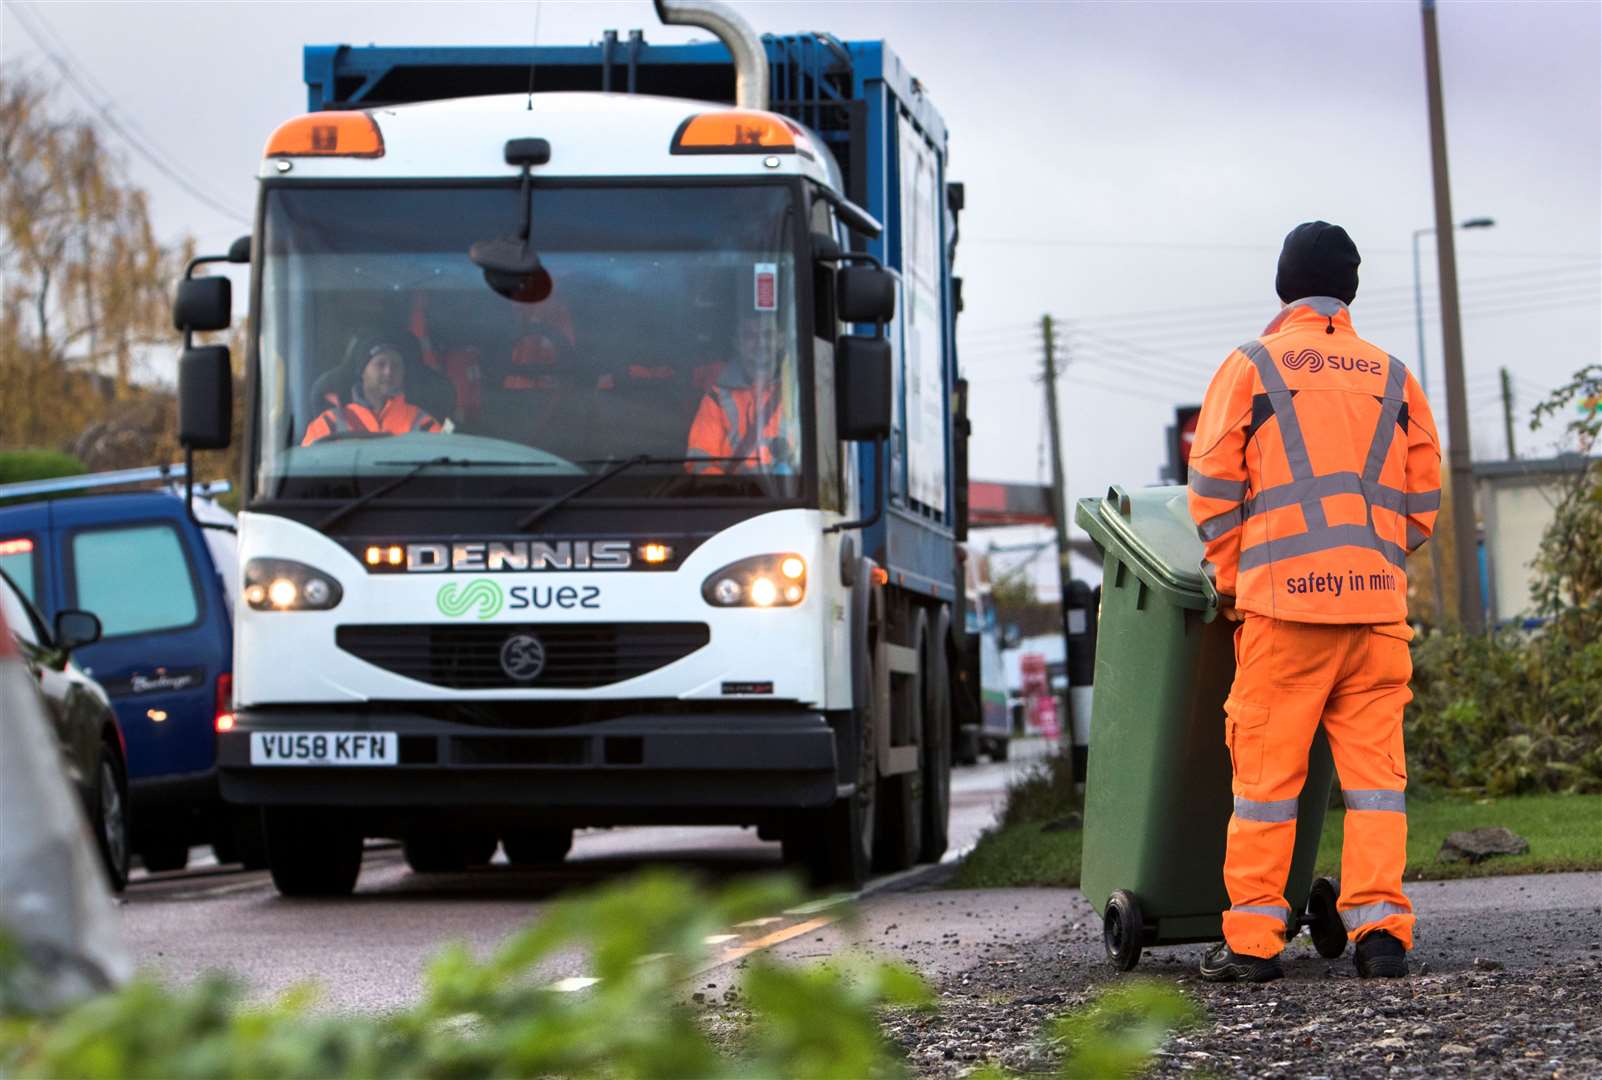 Maidstone residents have complained of bin collections being missed this week